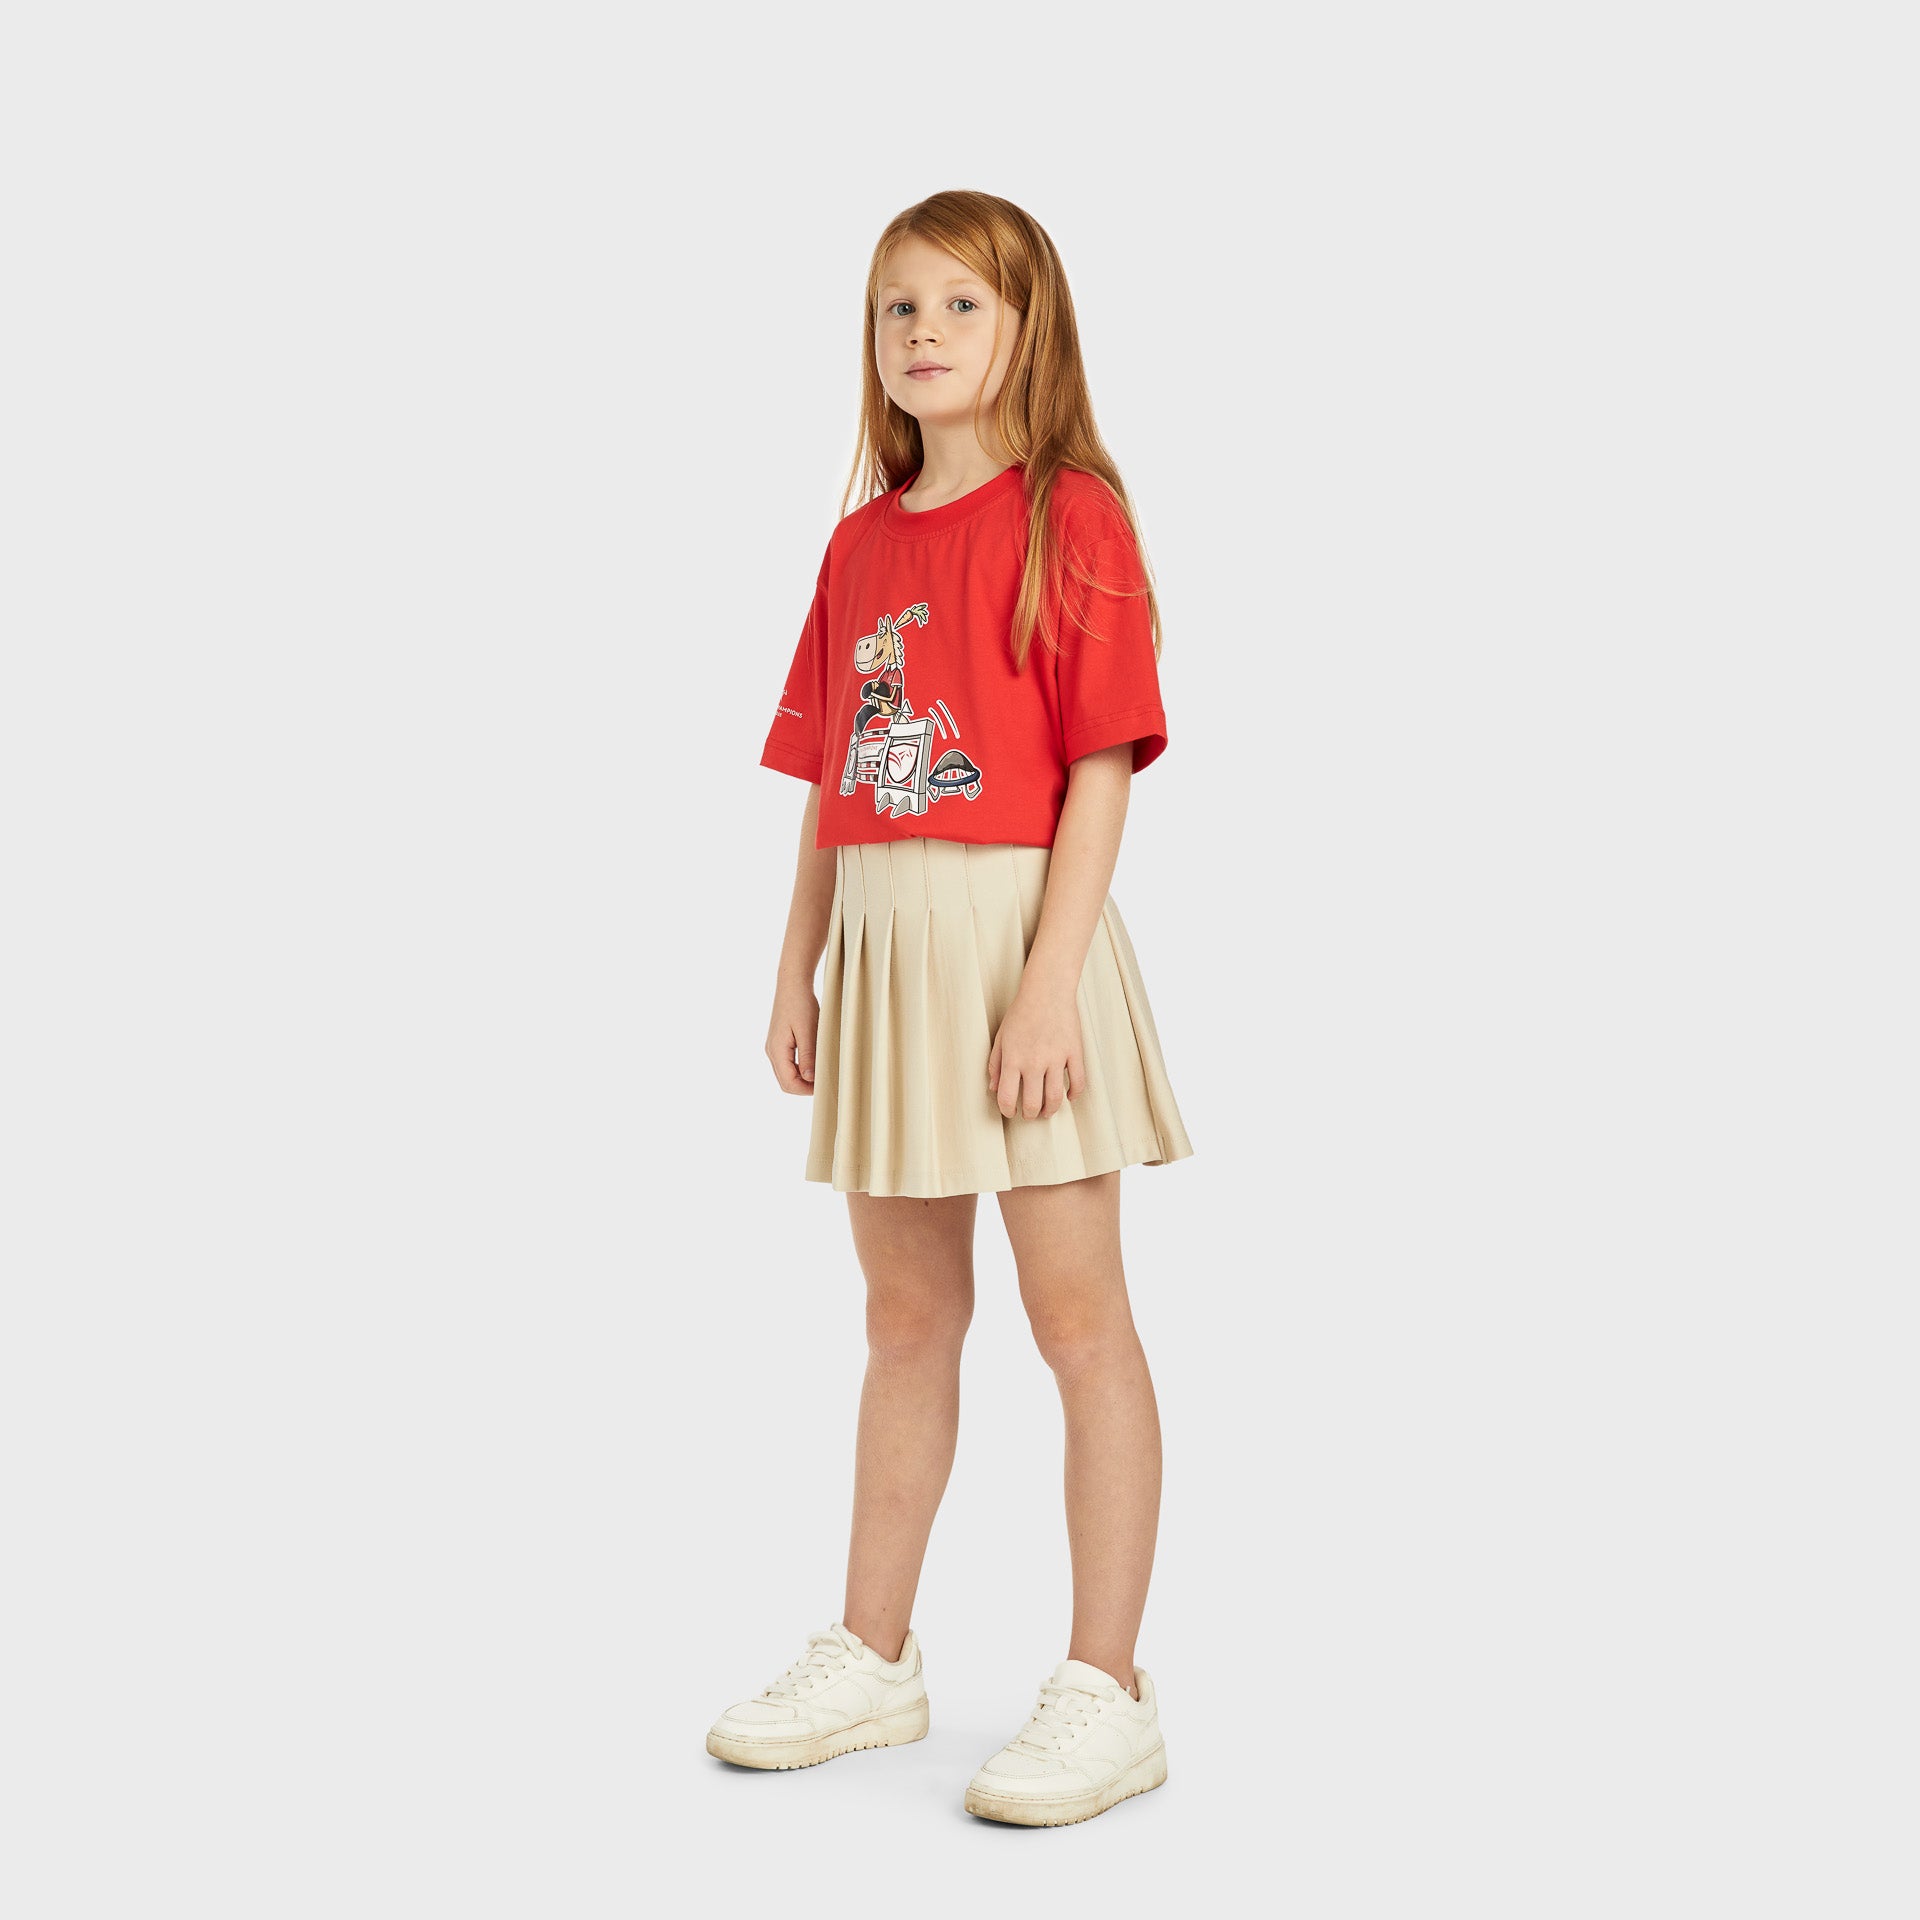 GCL Paco #1 Kids T-Shirt - Red